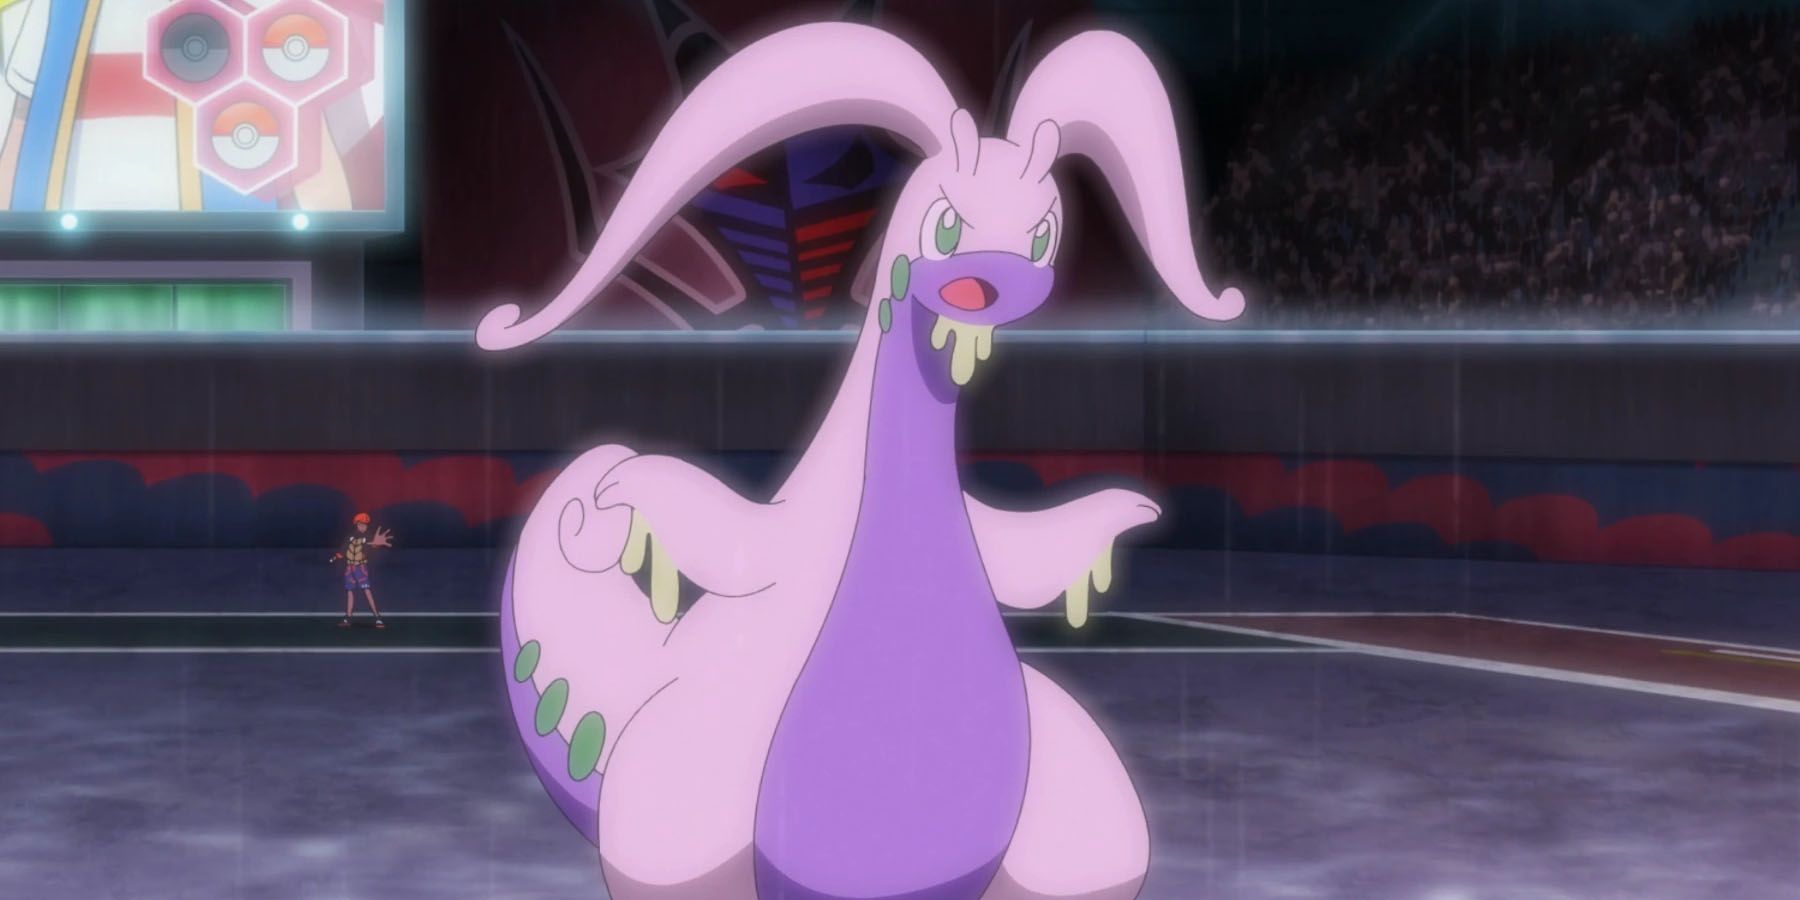 A screenshot of Goodra from the Pokemon anime.